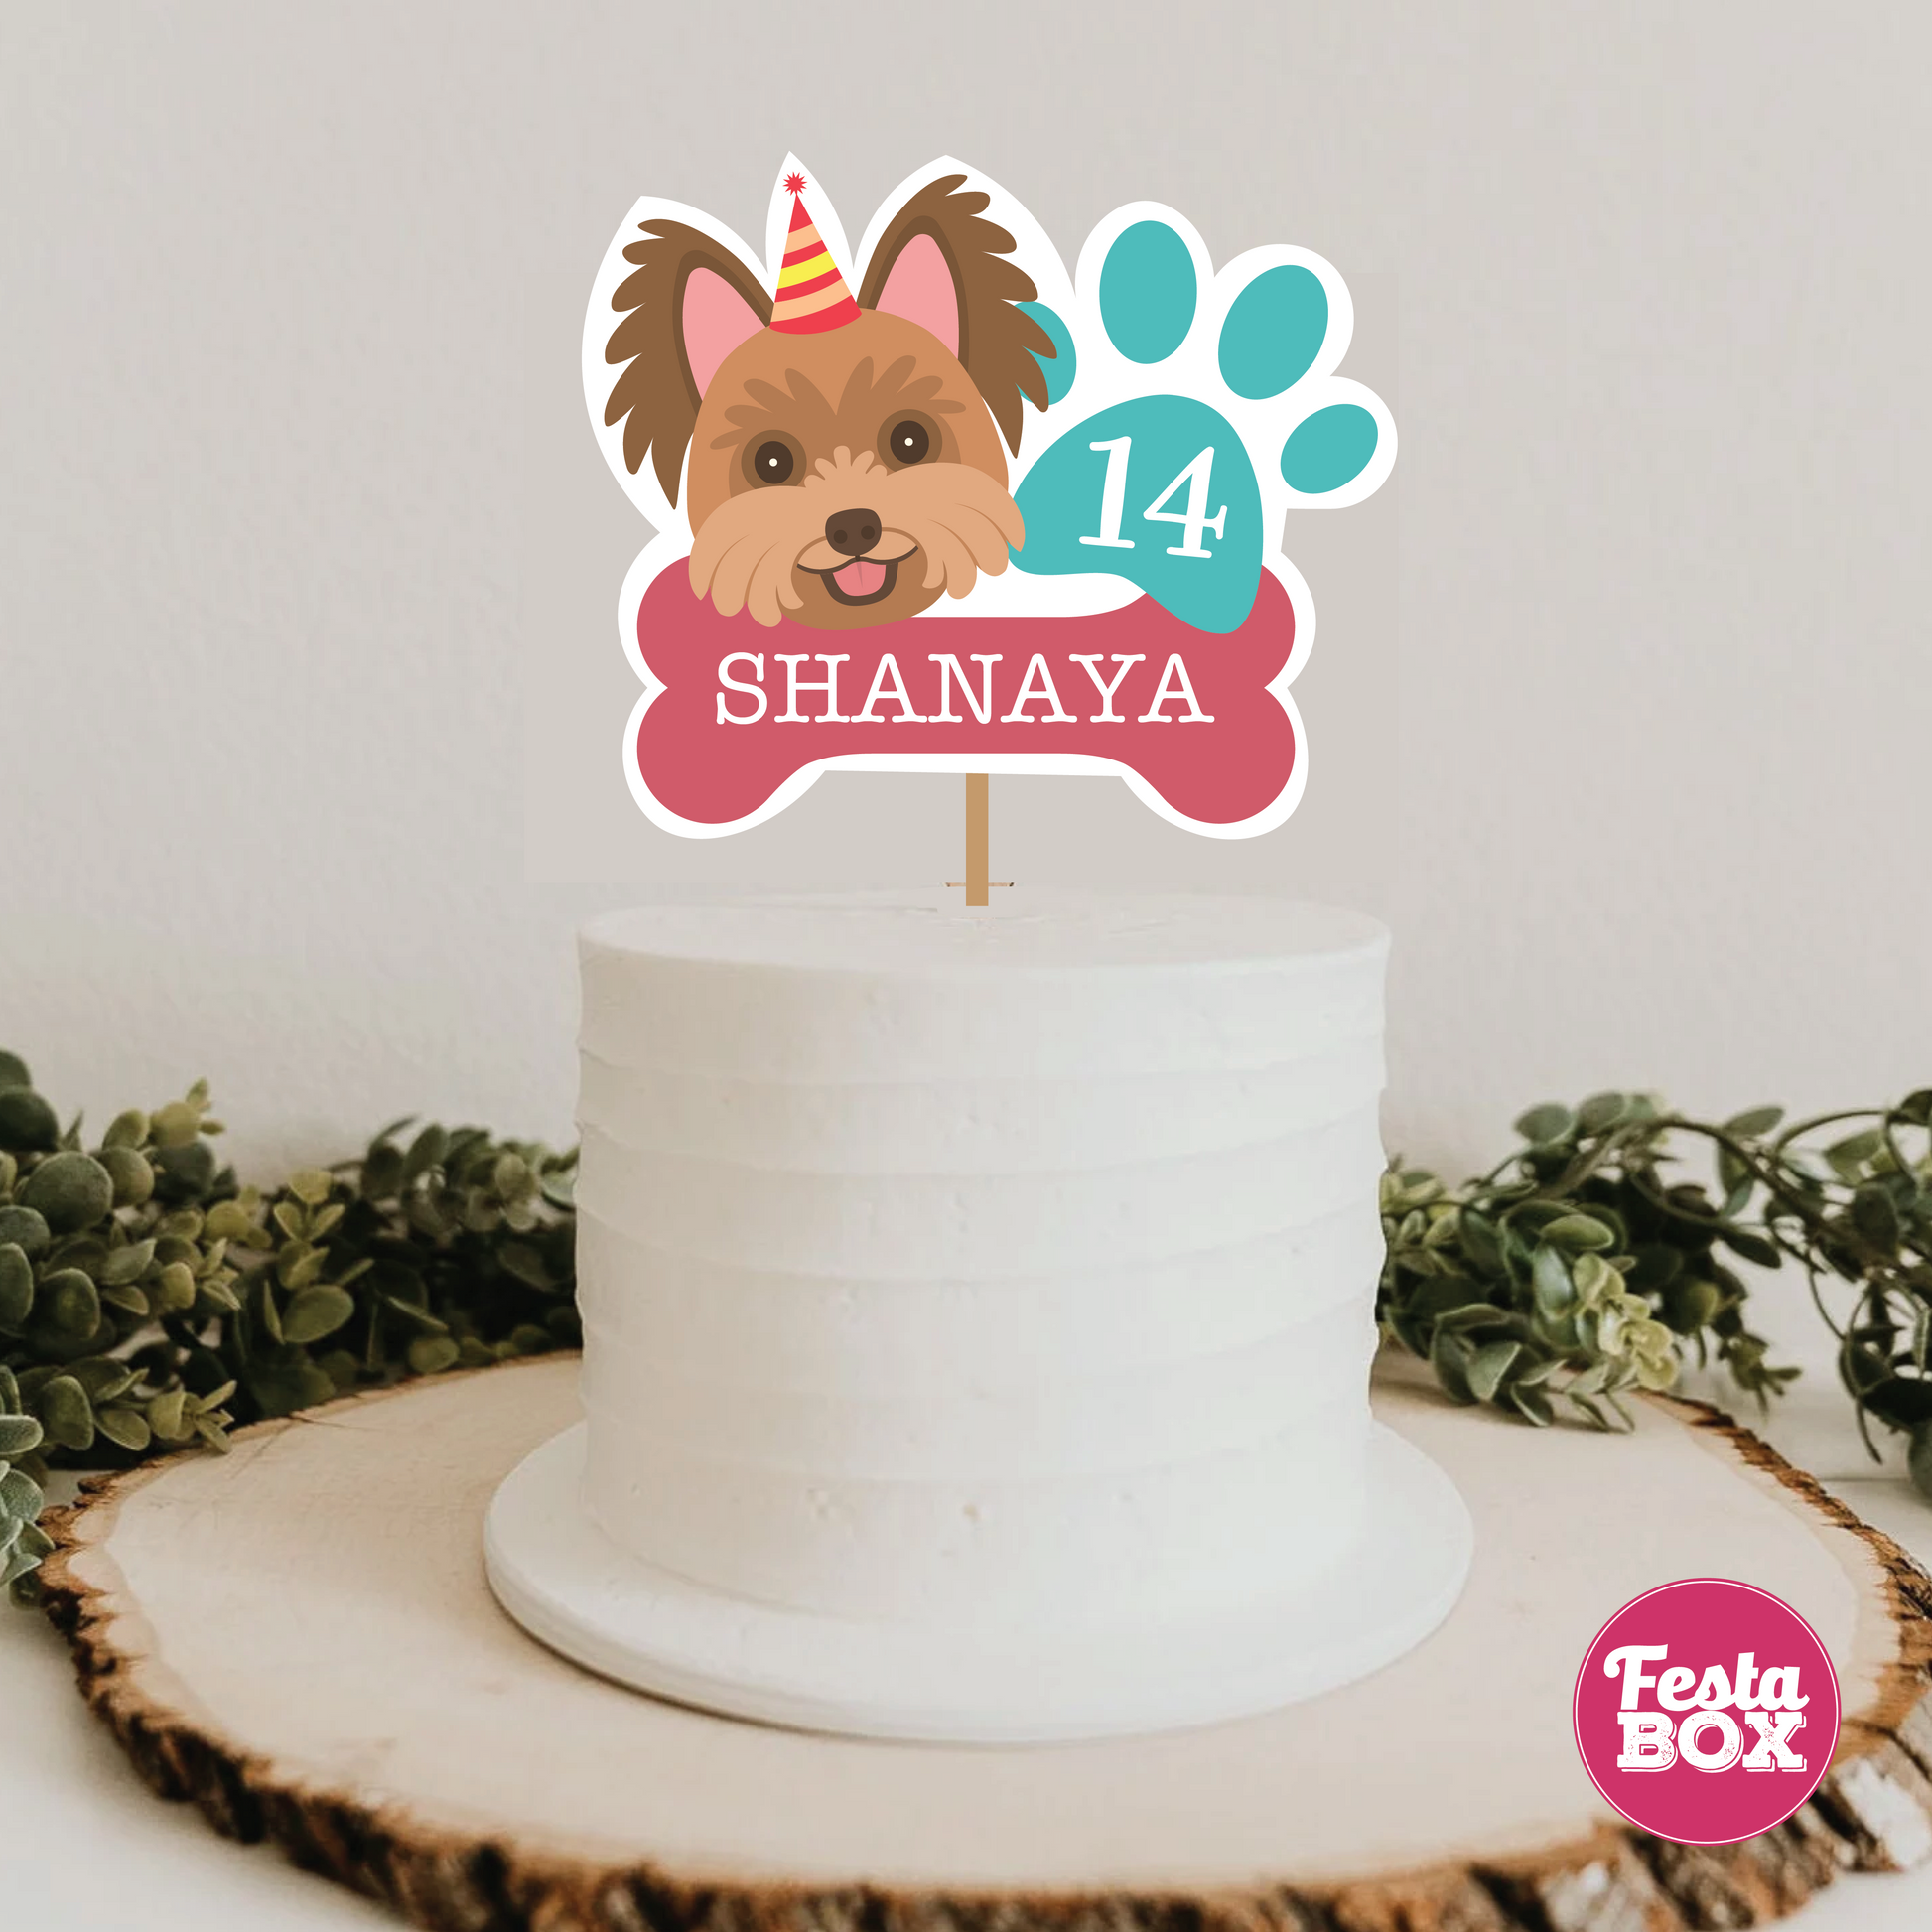 This cake topper is part of the Puppy Birthday Party Theme by Festabox